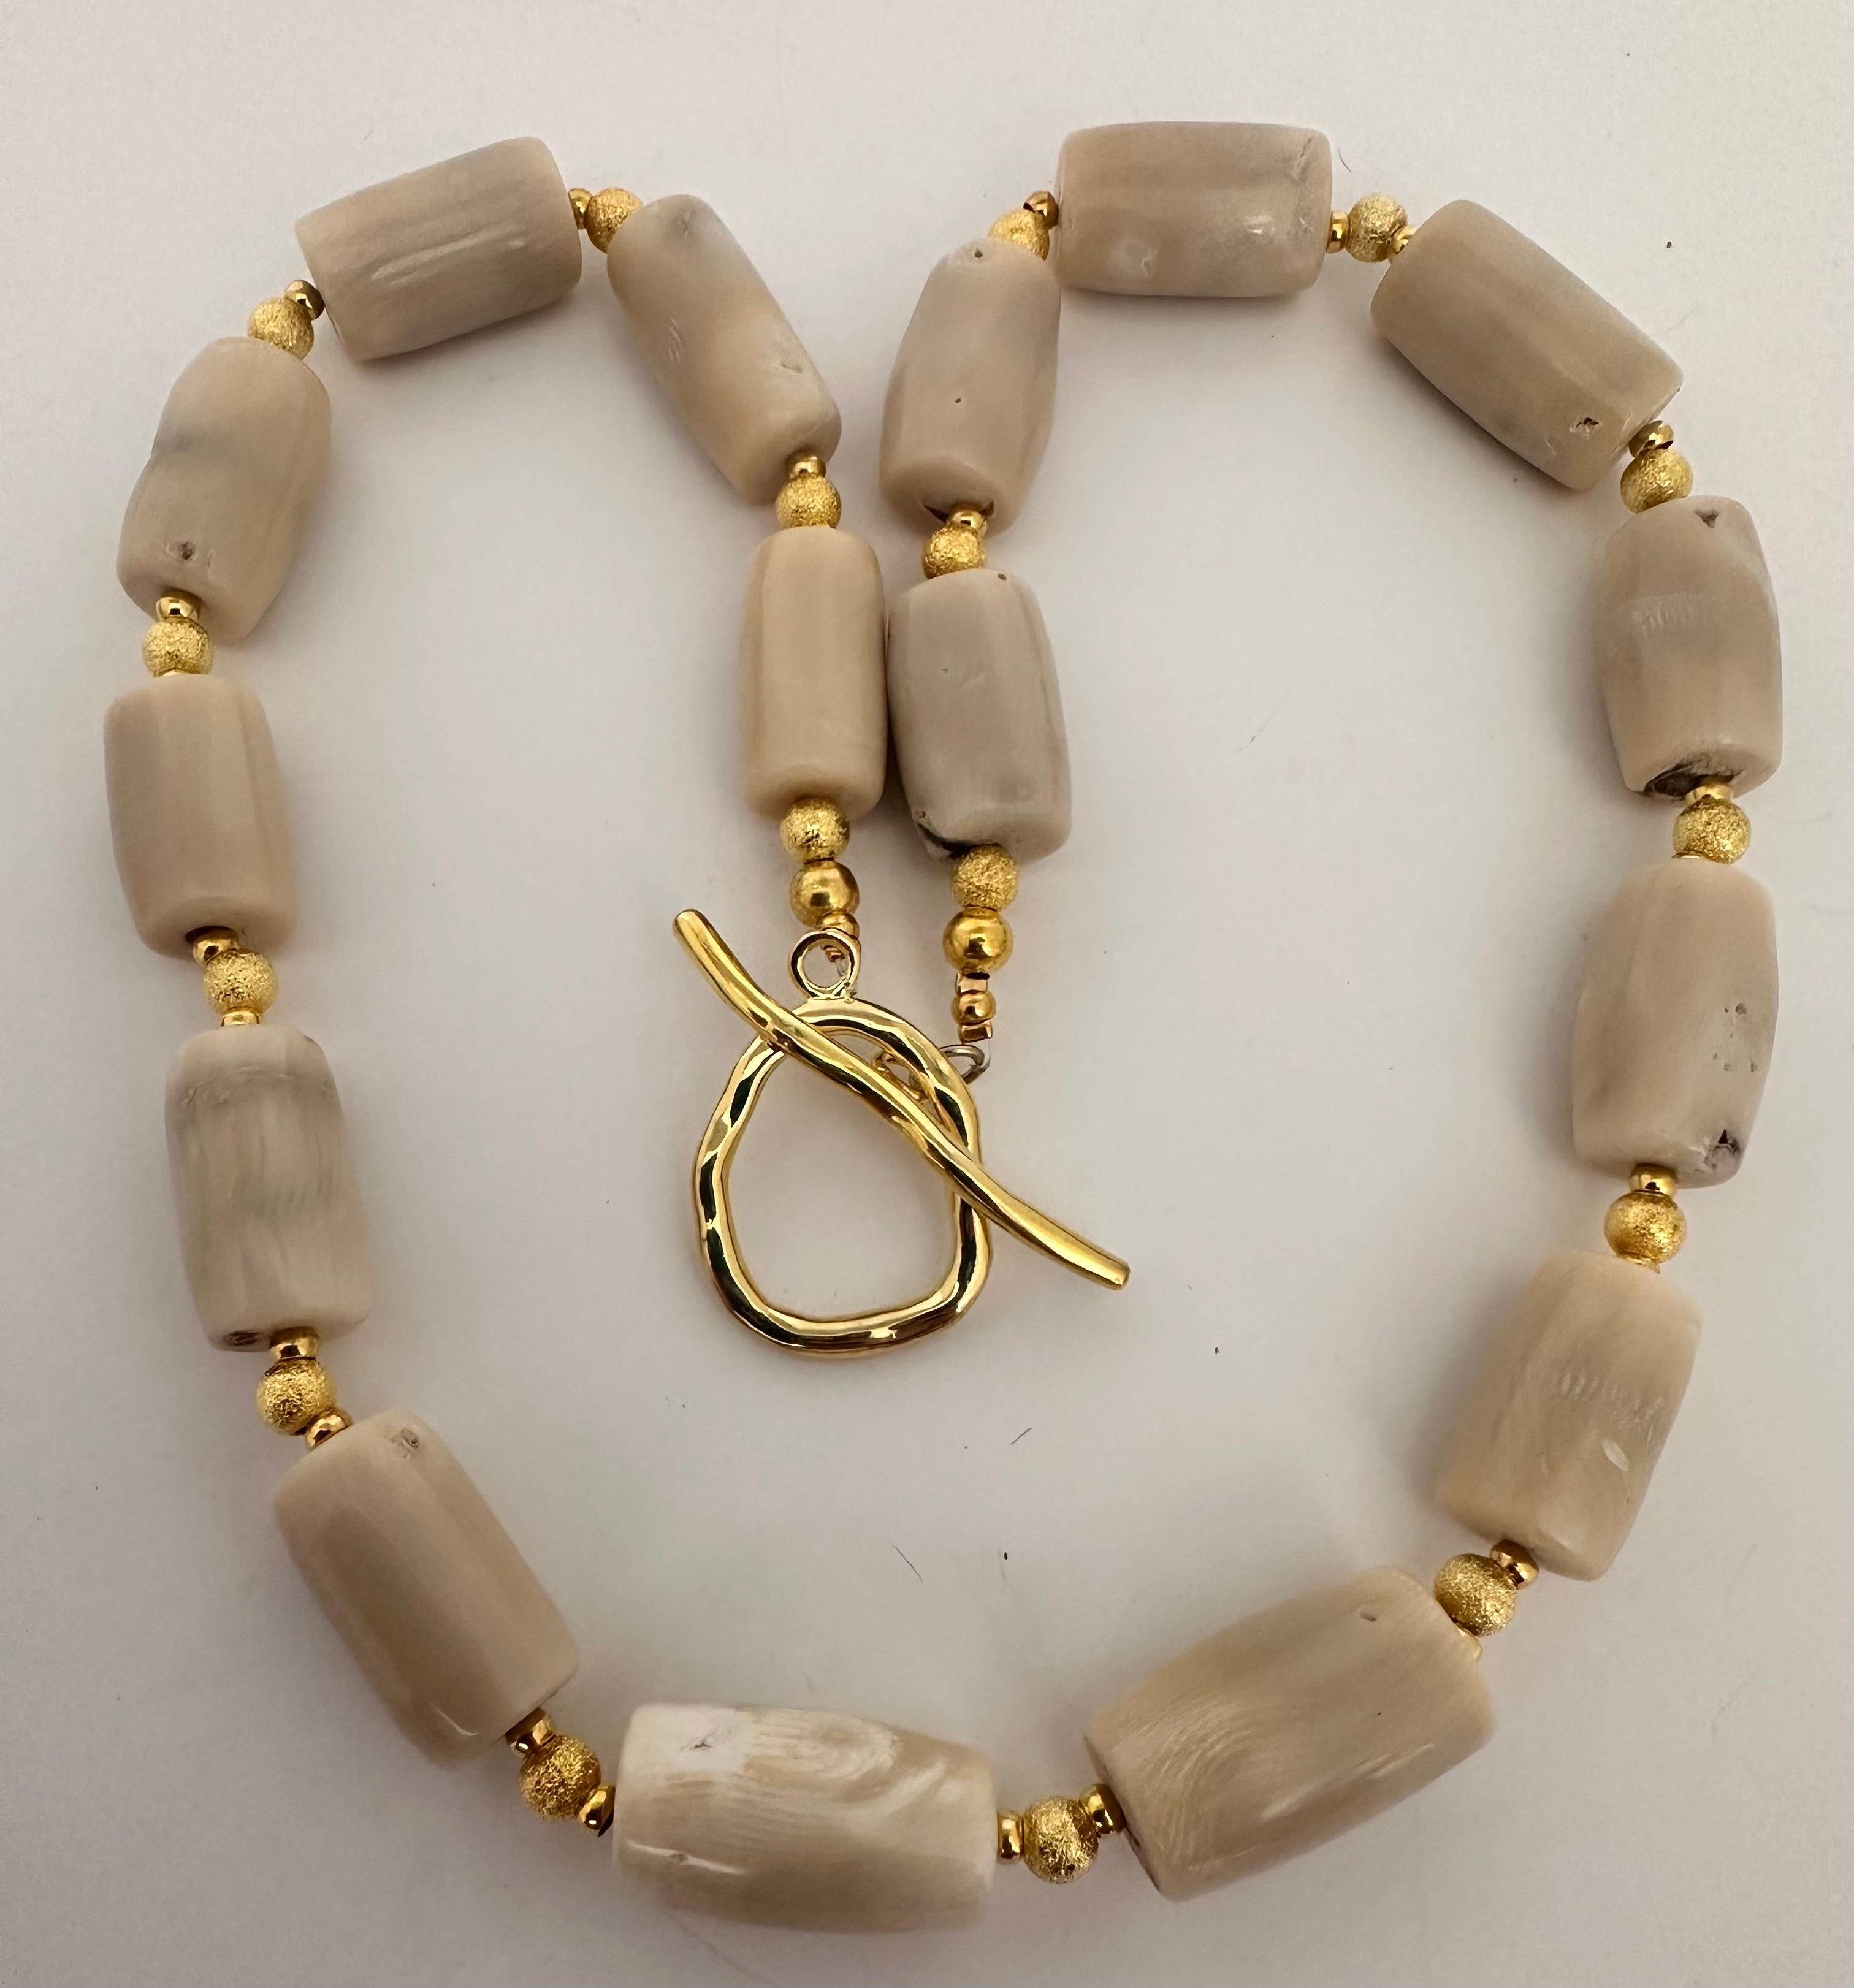 Handmade ~ Gold Beads and White/Beige Coral Barrel Shaped Beaded 25